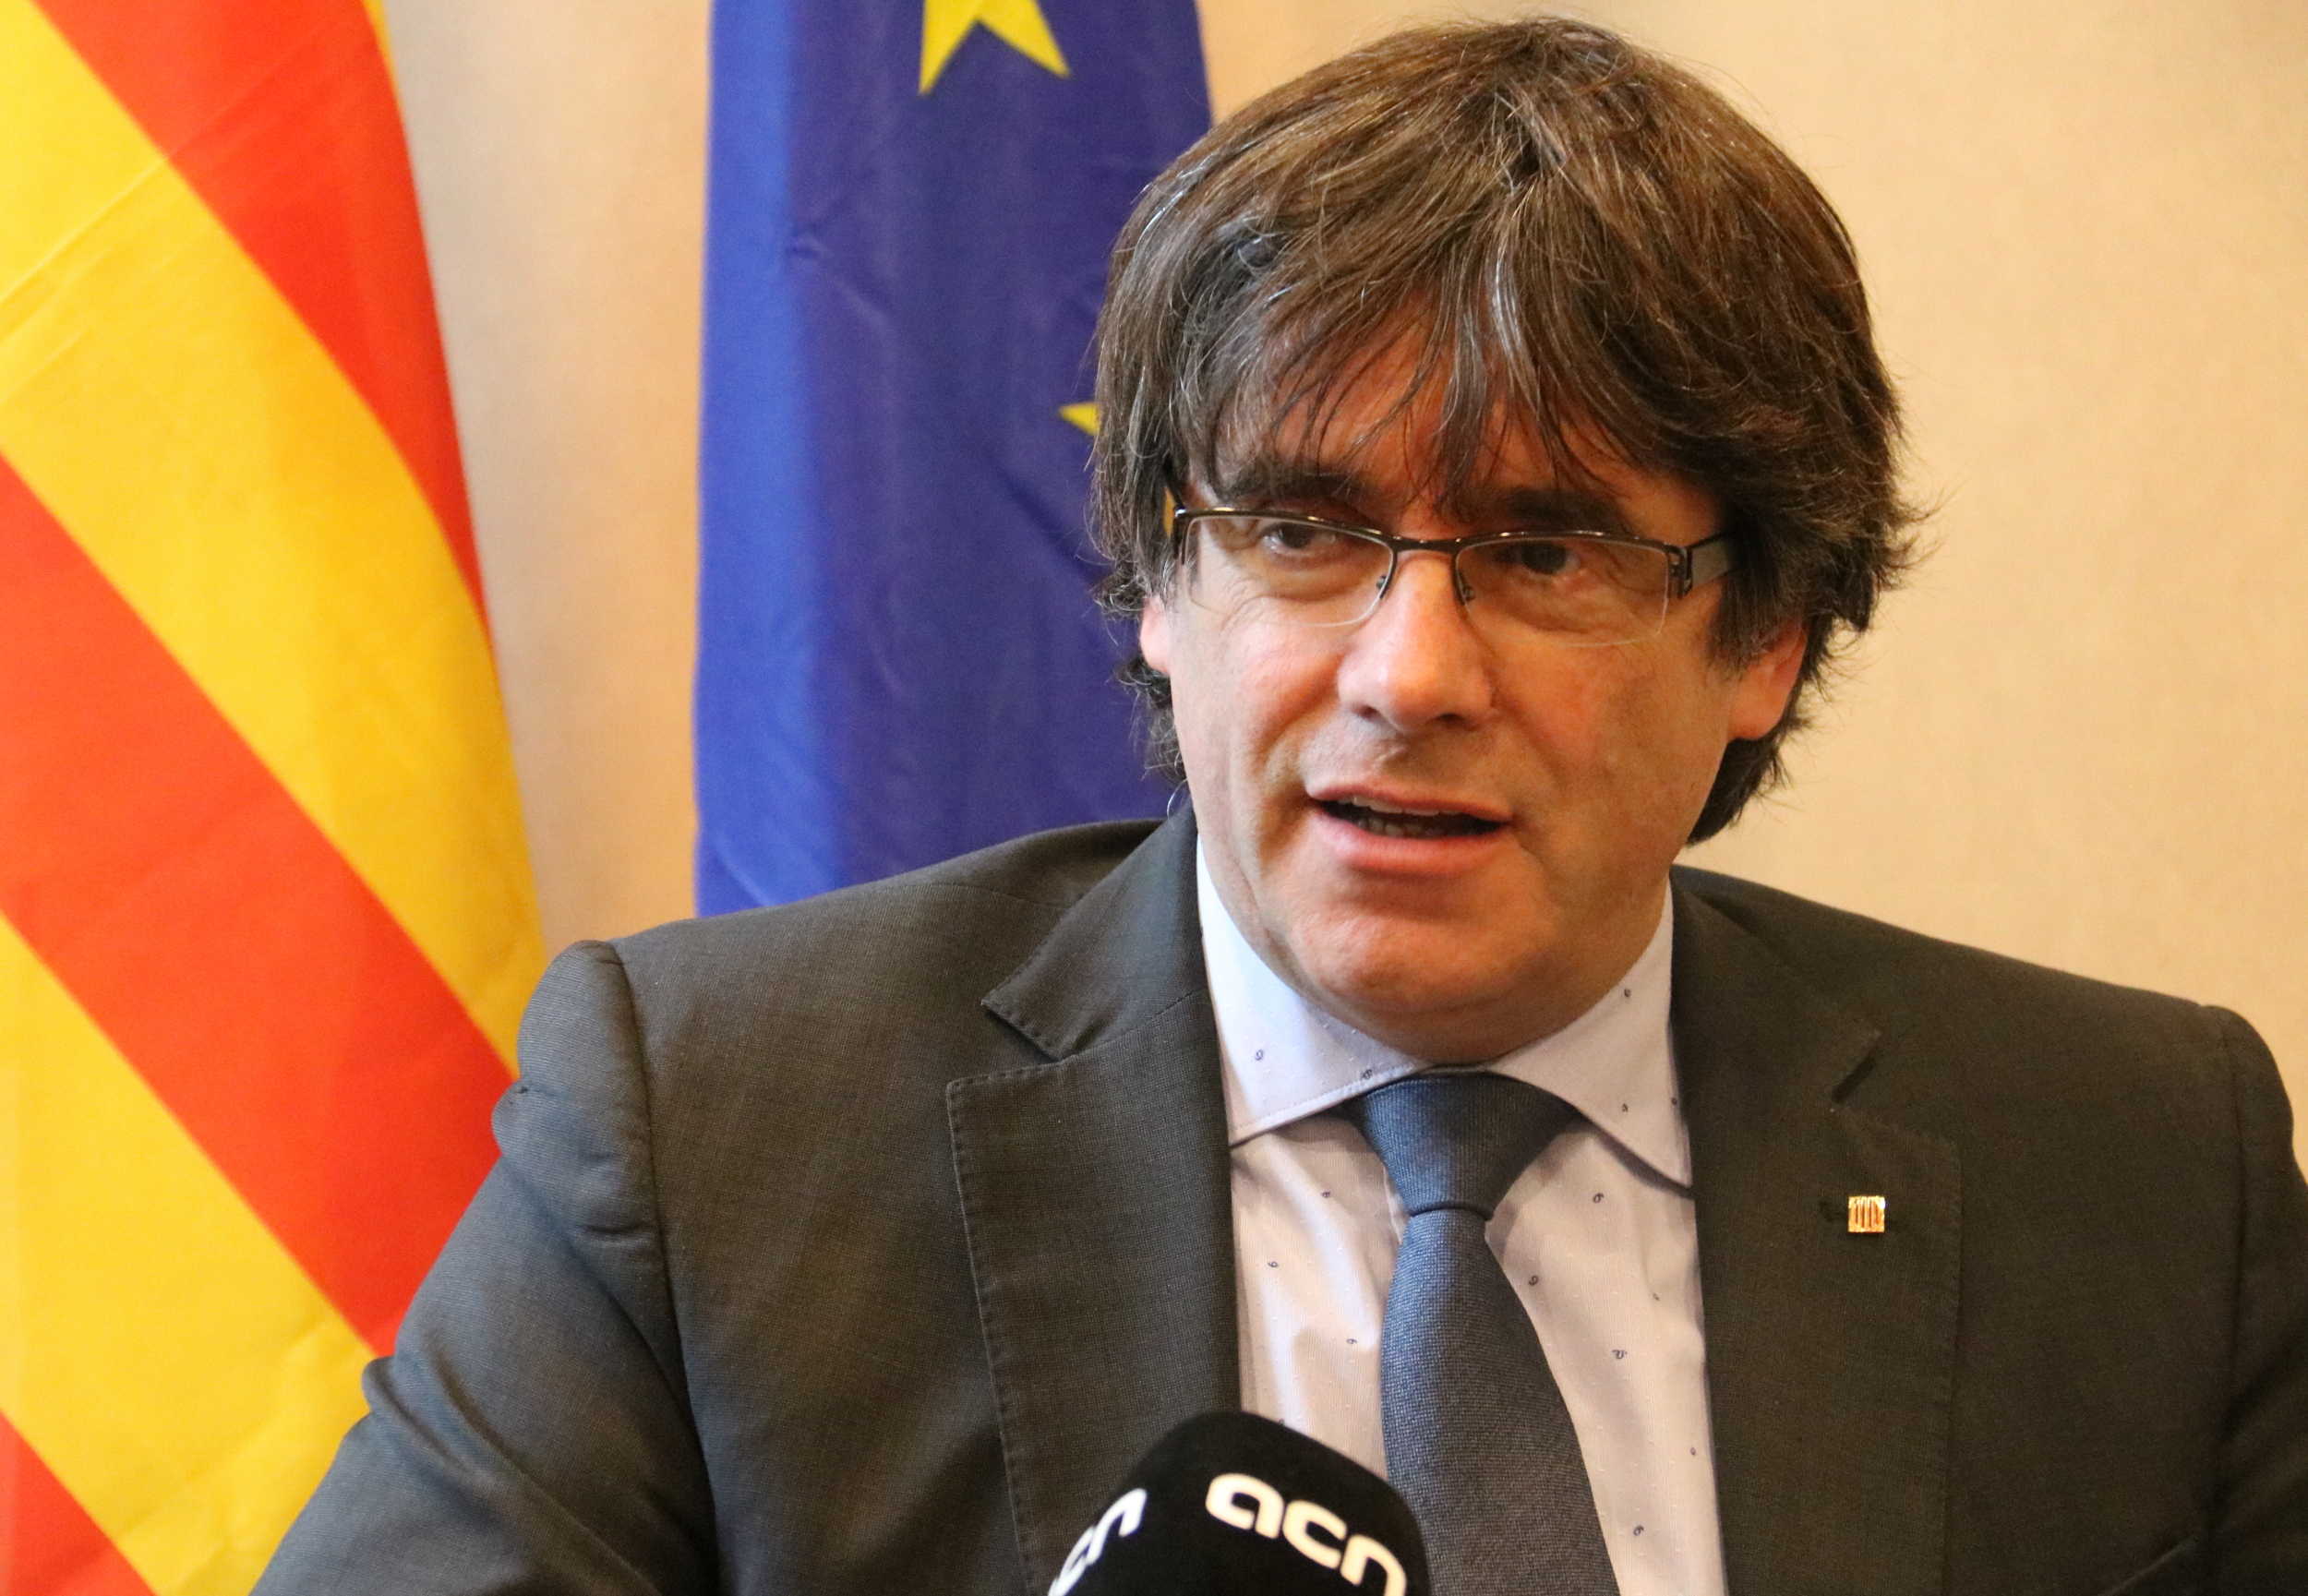 Deposed Catalan president Carles Puigdemont in an interview with Catalan News (by Blanca Blay)